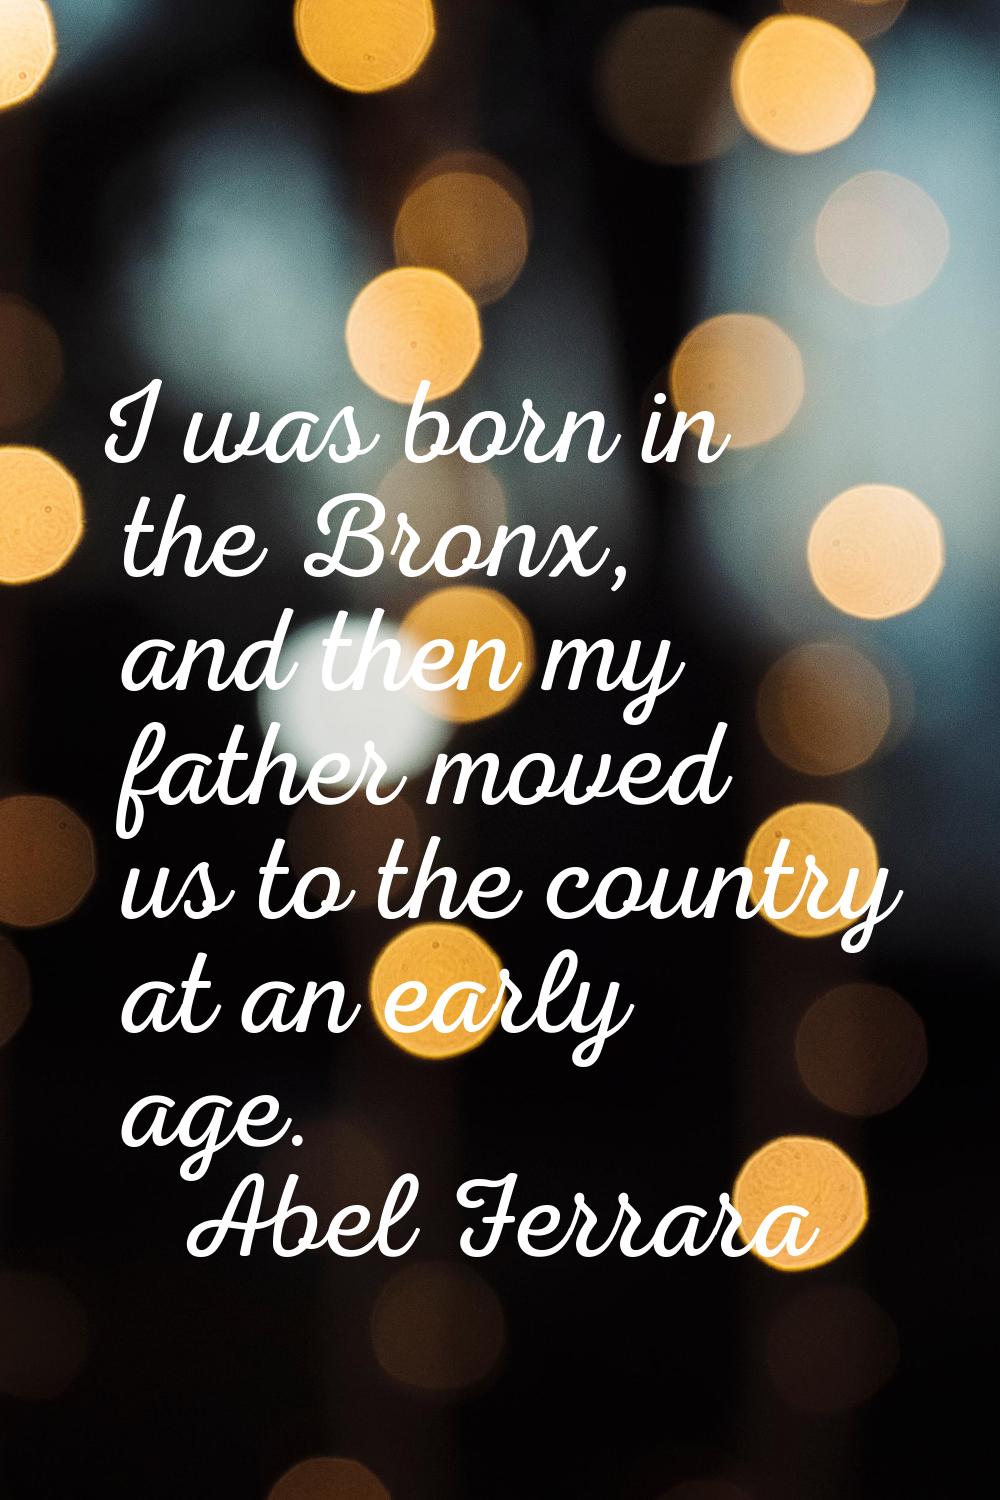 I was born in the Bronx, and then my father moved us to the country at an early age.